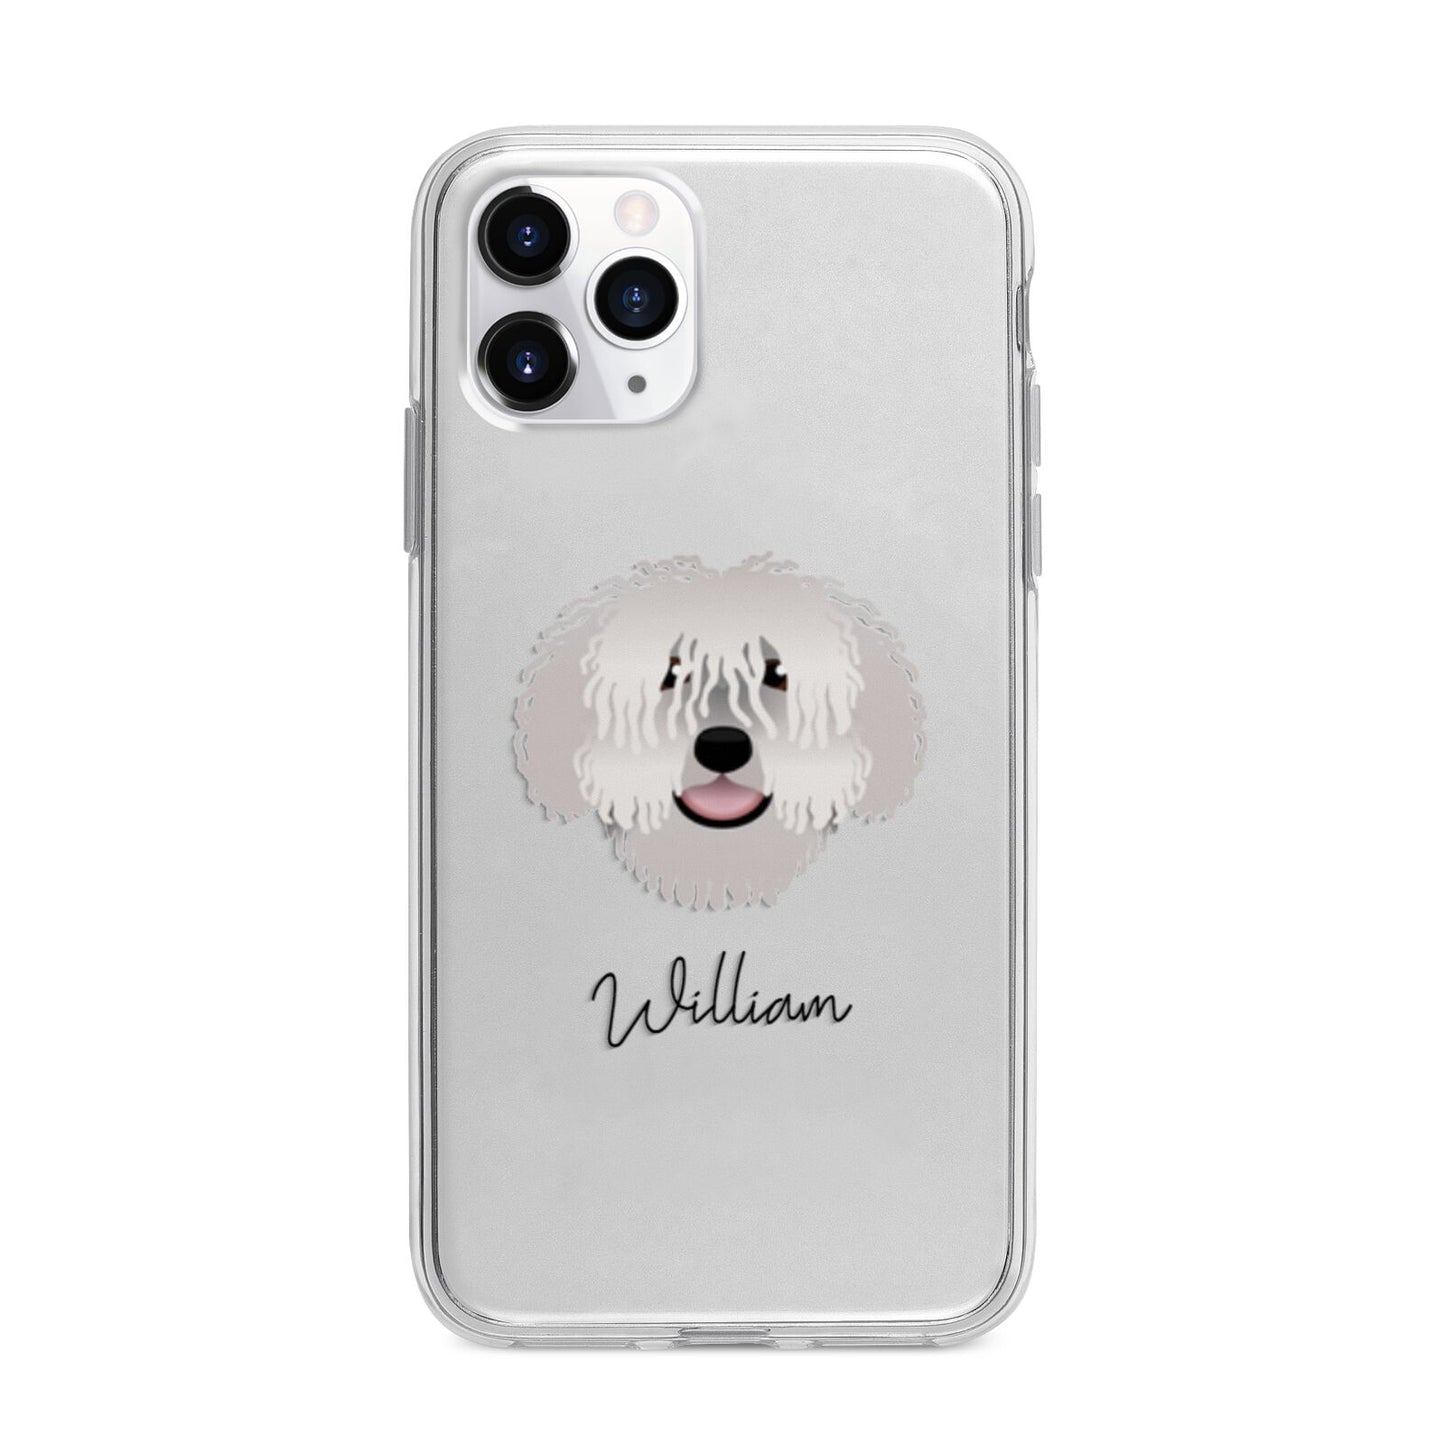 Spanish Water Dog Personalised Apple iPhone 11 Pro Max in Silver with Bumper Case